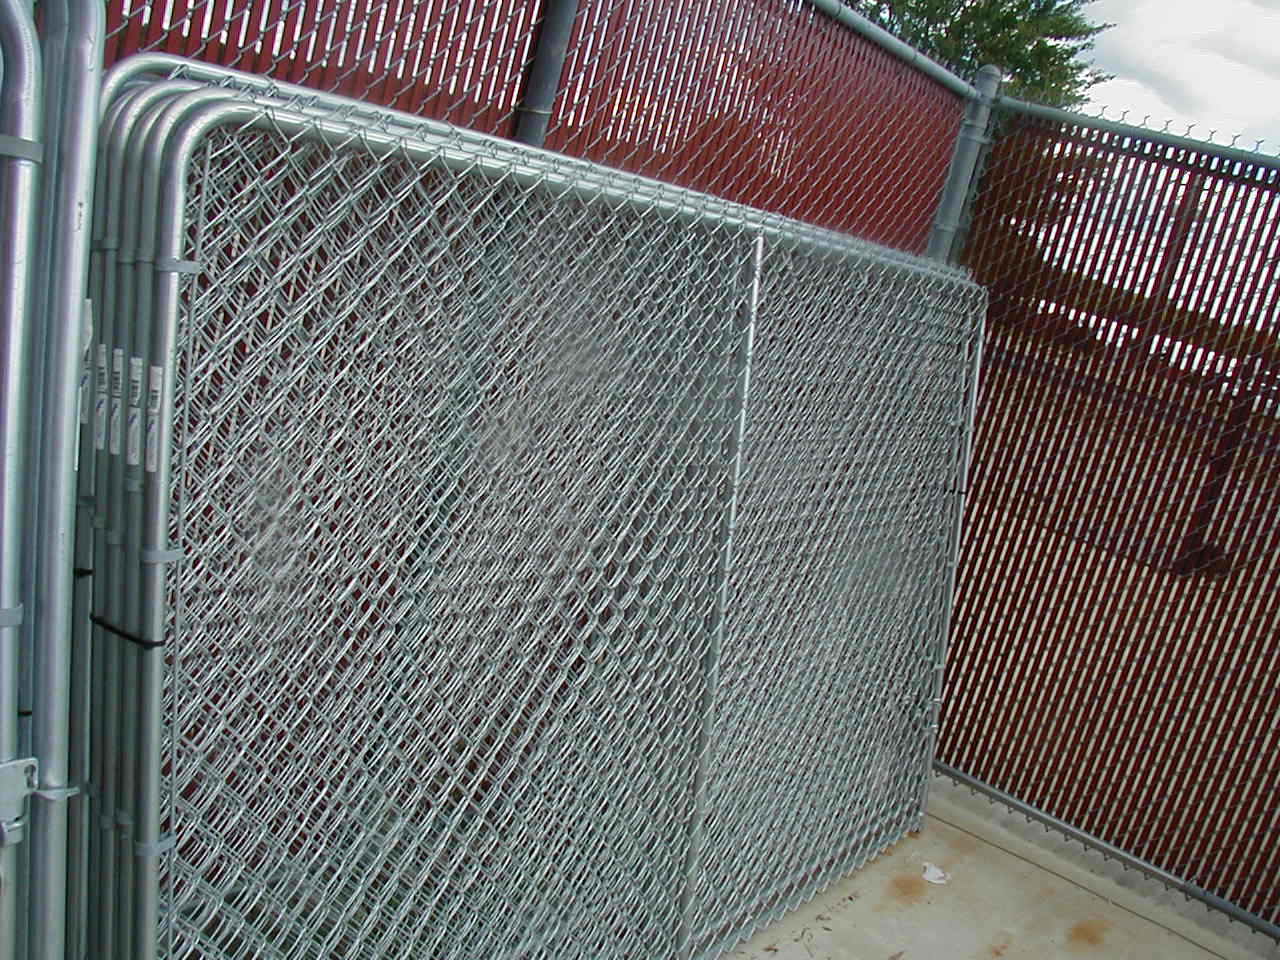 Residential Fencing: Aesthetically Pleasing and Functional